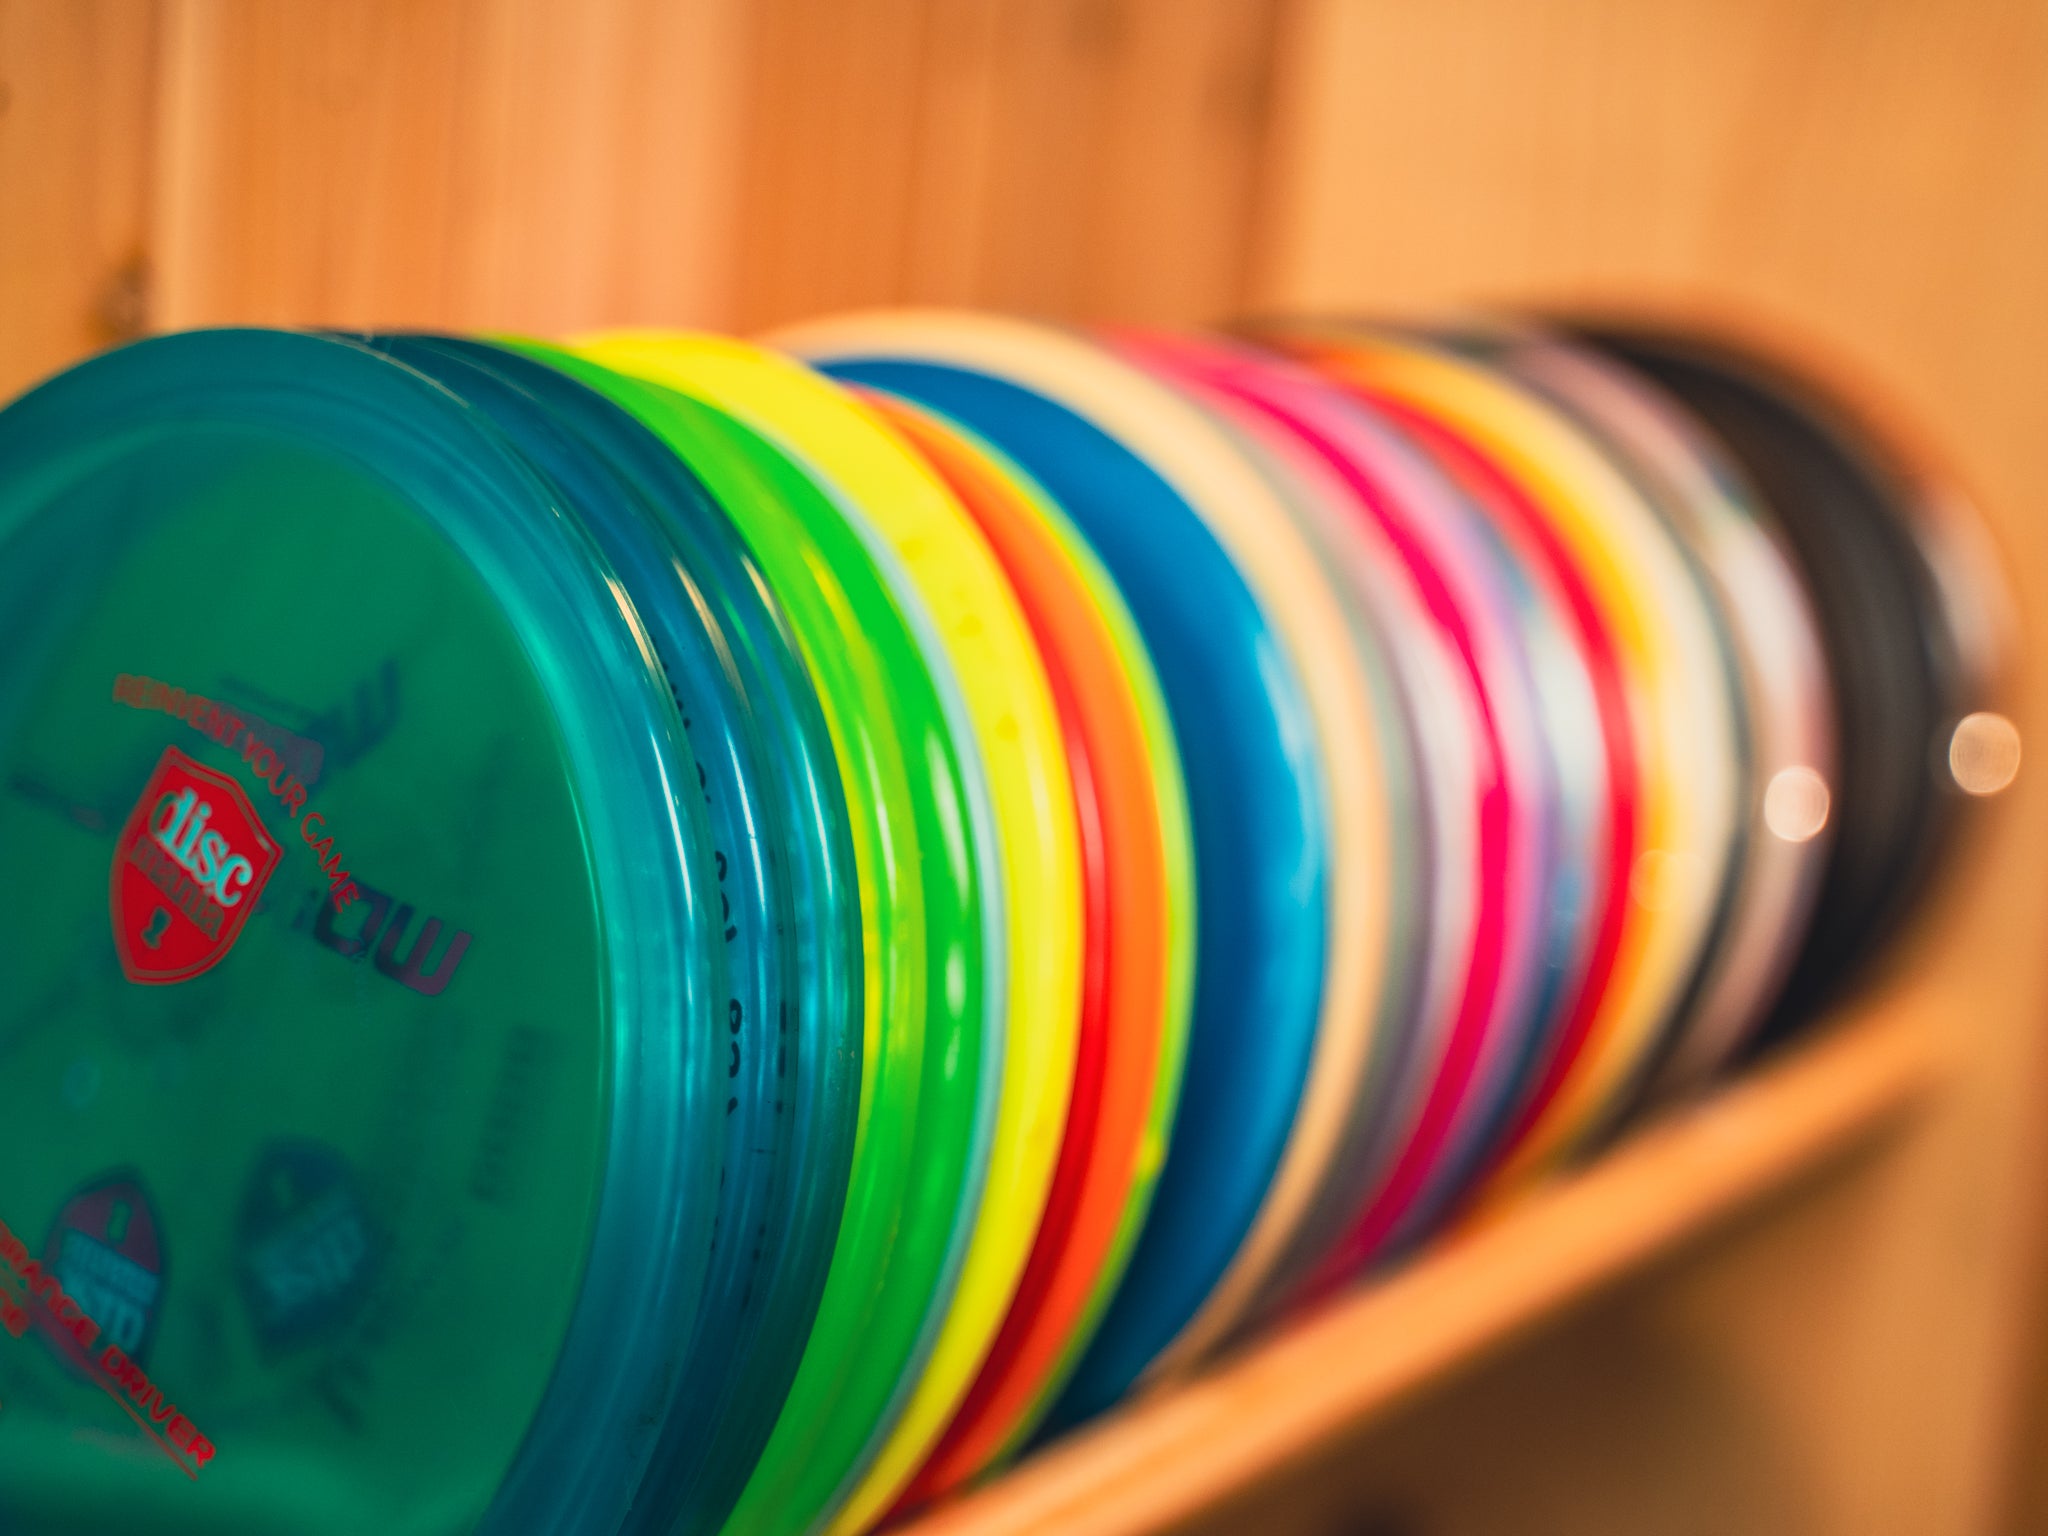 Pre-Owned Discs